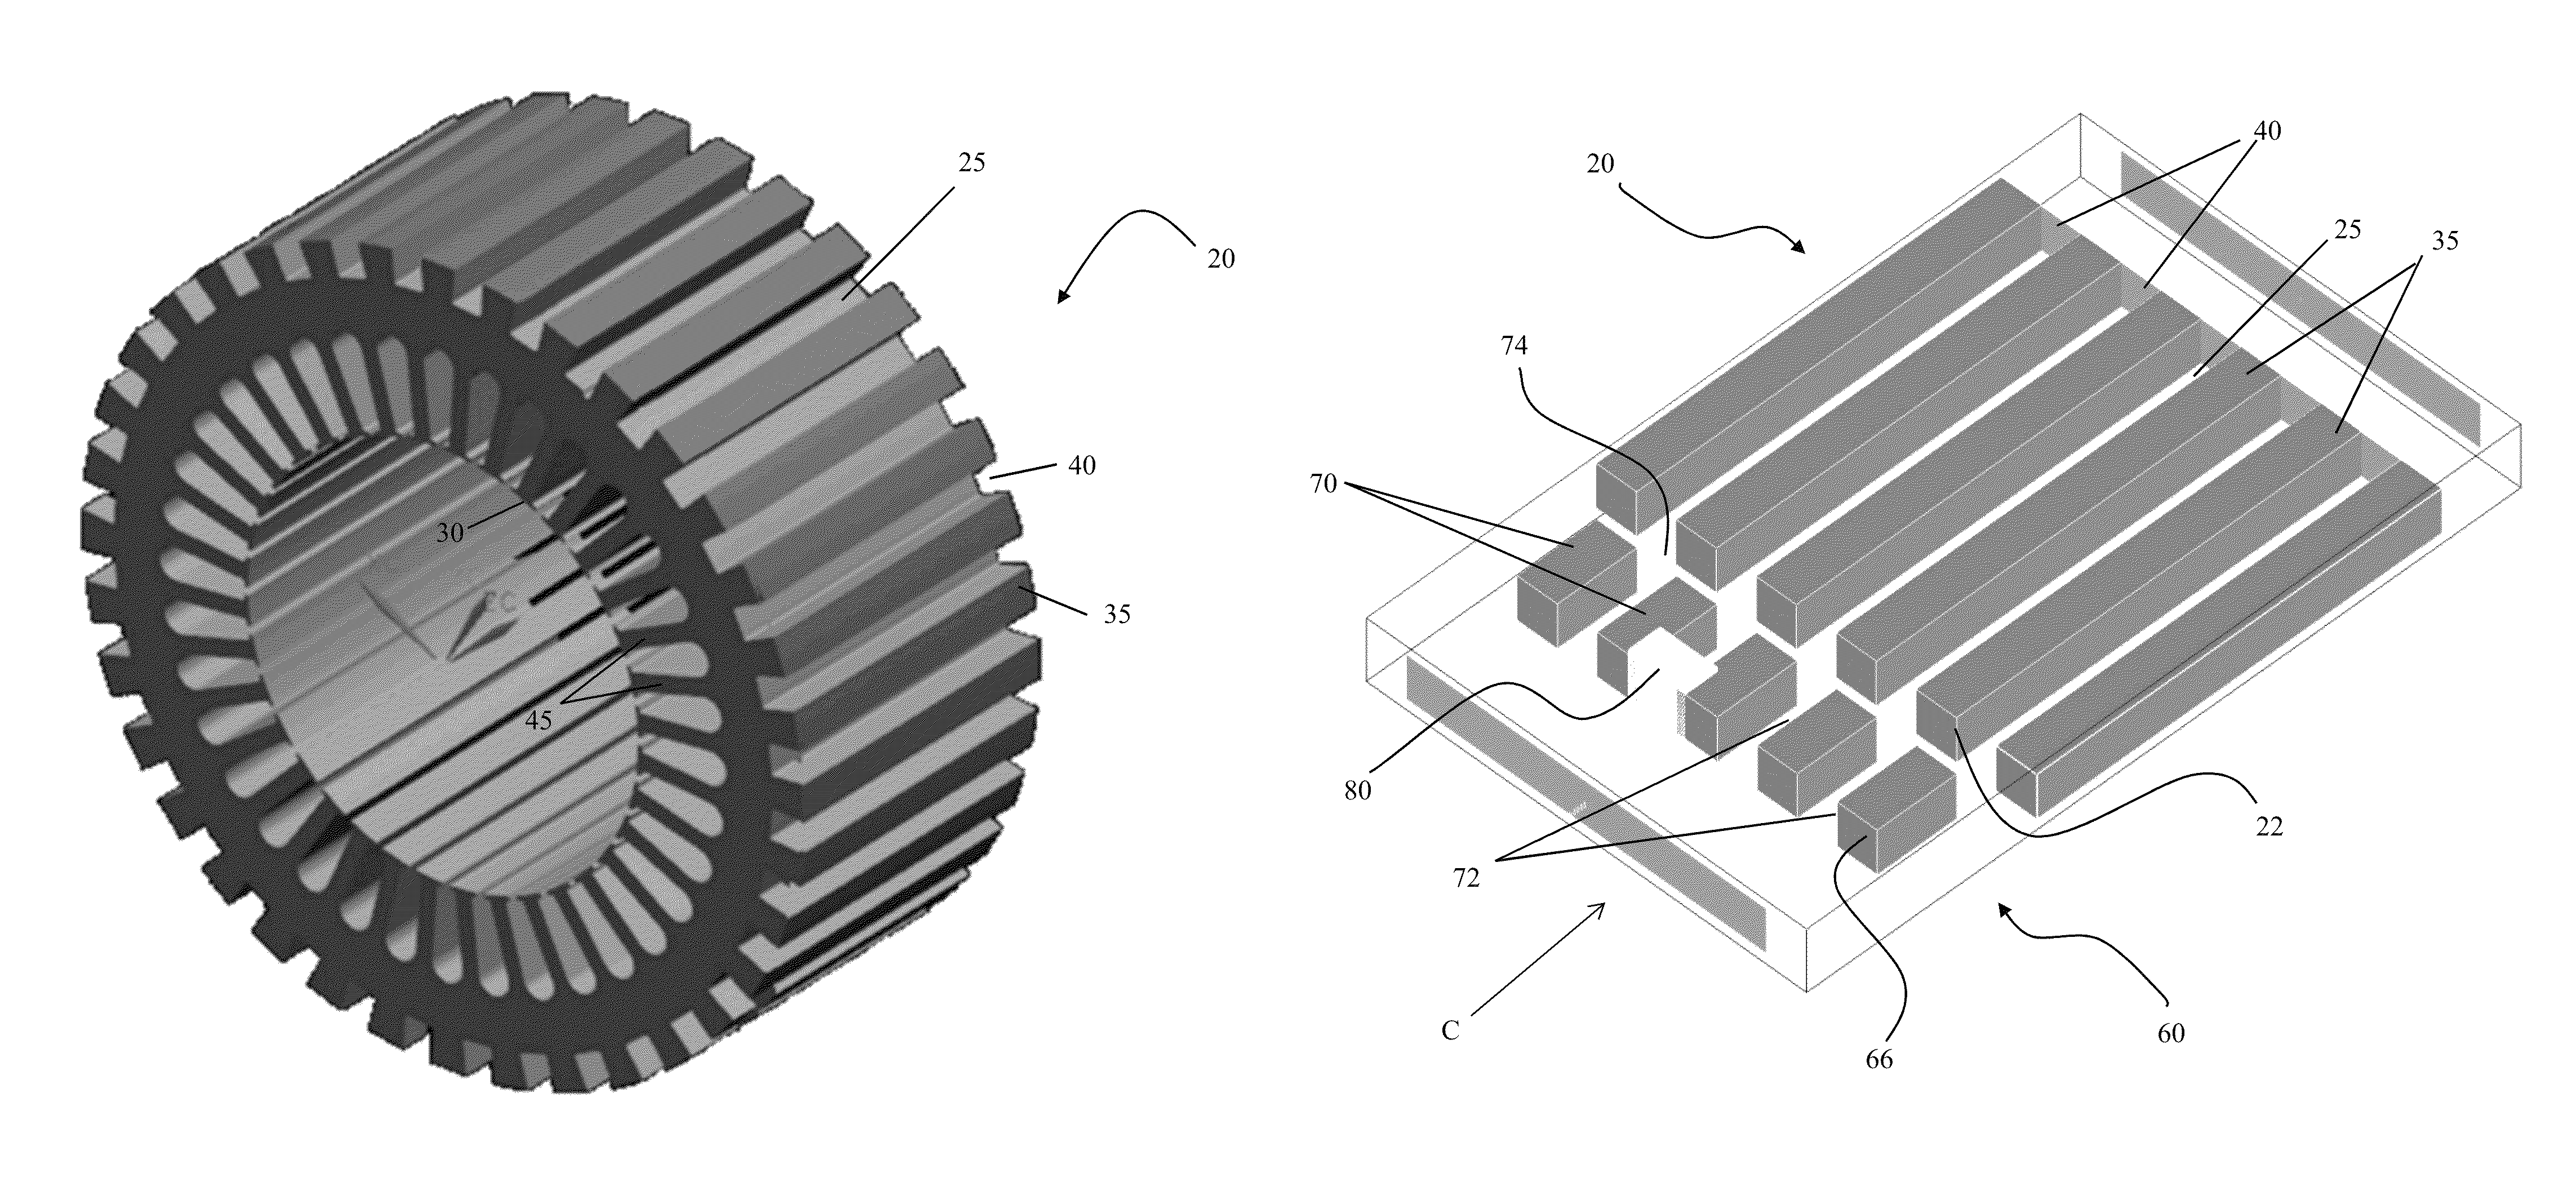 Stator cooling channel tolerant to localized blockage